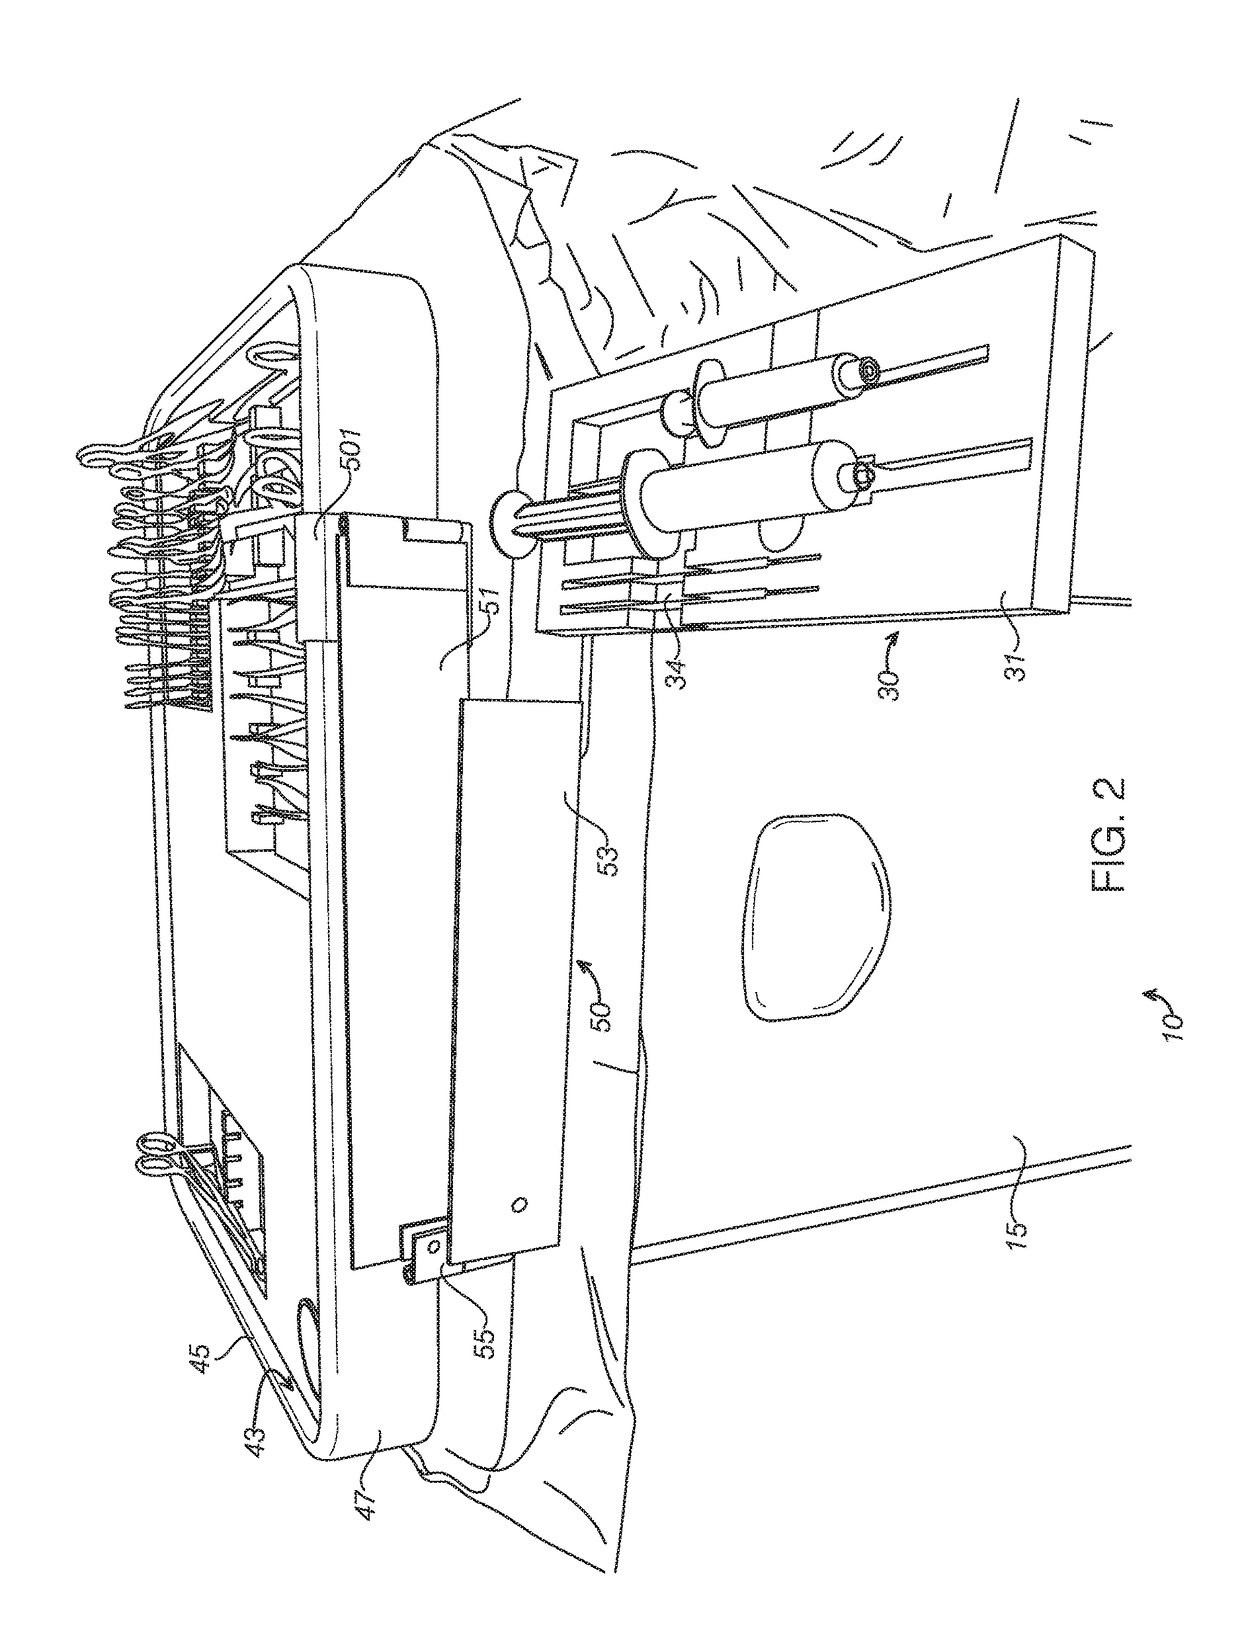 System, method and device for a medical surgery tray